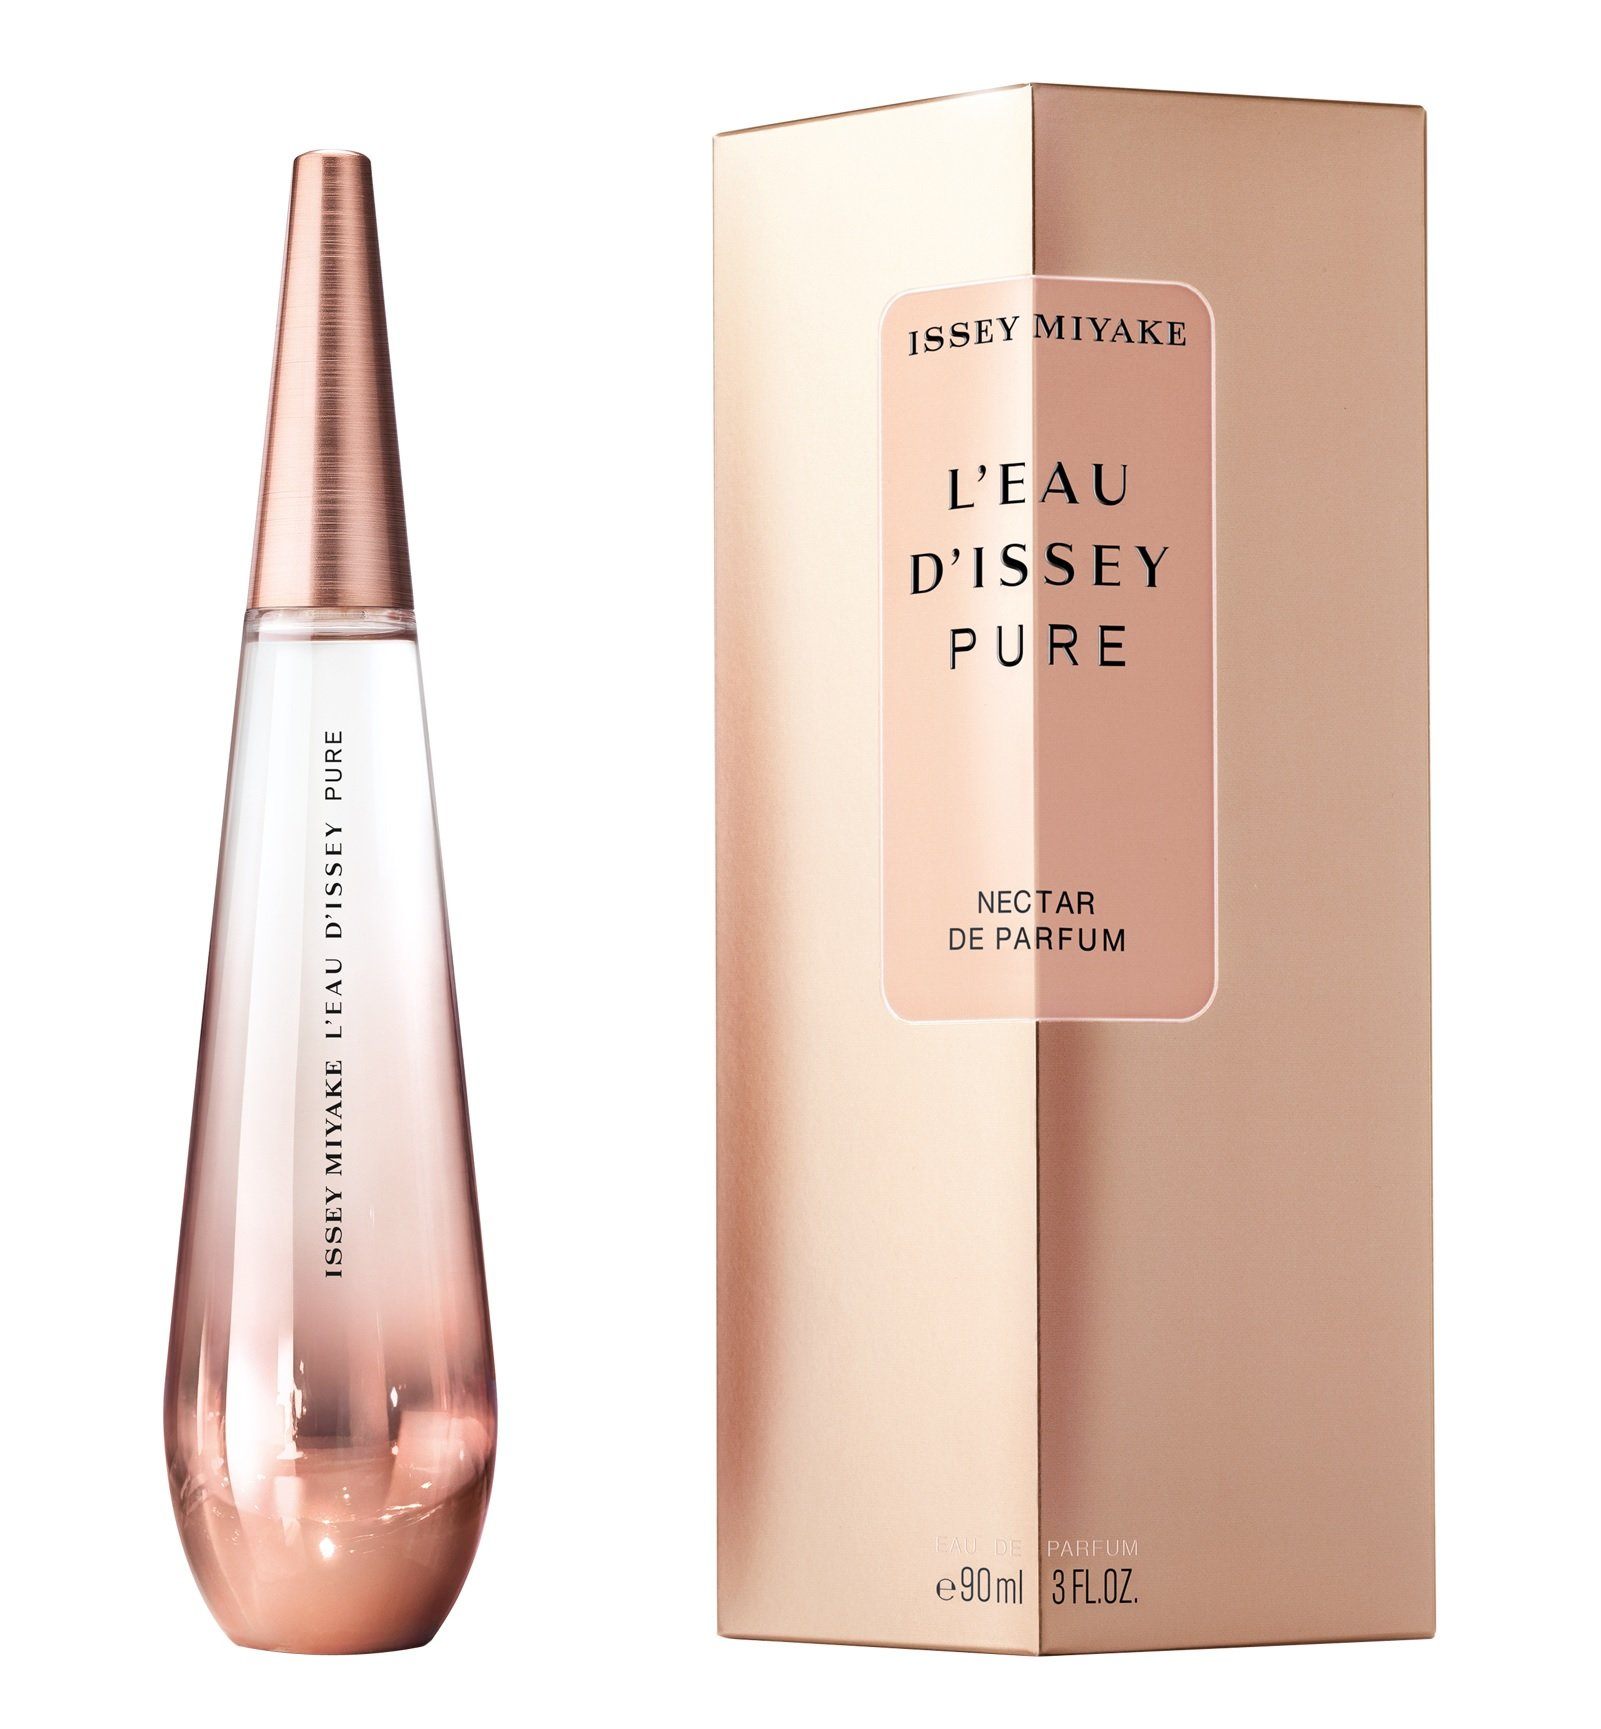 A delicate drop softly captures the purest scent of a flower. Issey Miyake's L'Eau D'Issey Pure Nectar de Parfum is an aquatic floral interpretation of the original Pure Eau de Parfum.<br><br>Fragrance Notes:<br>Top - Honey pear<br>Mid - Sweet rose<br>Base - Creamy sandalwood